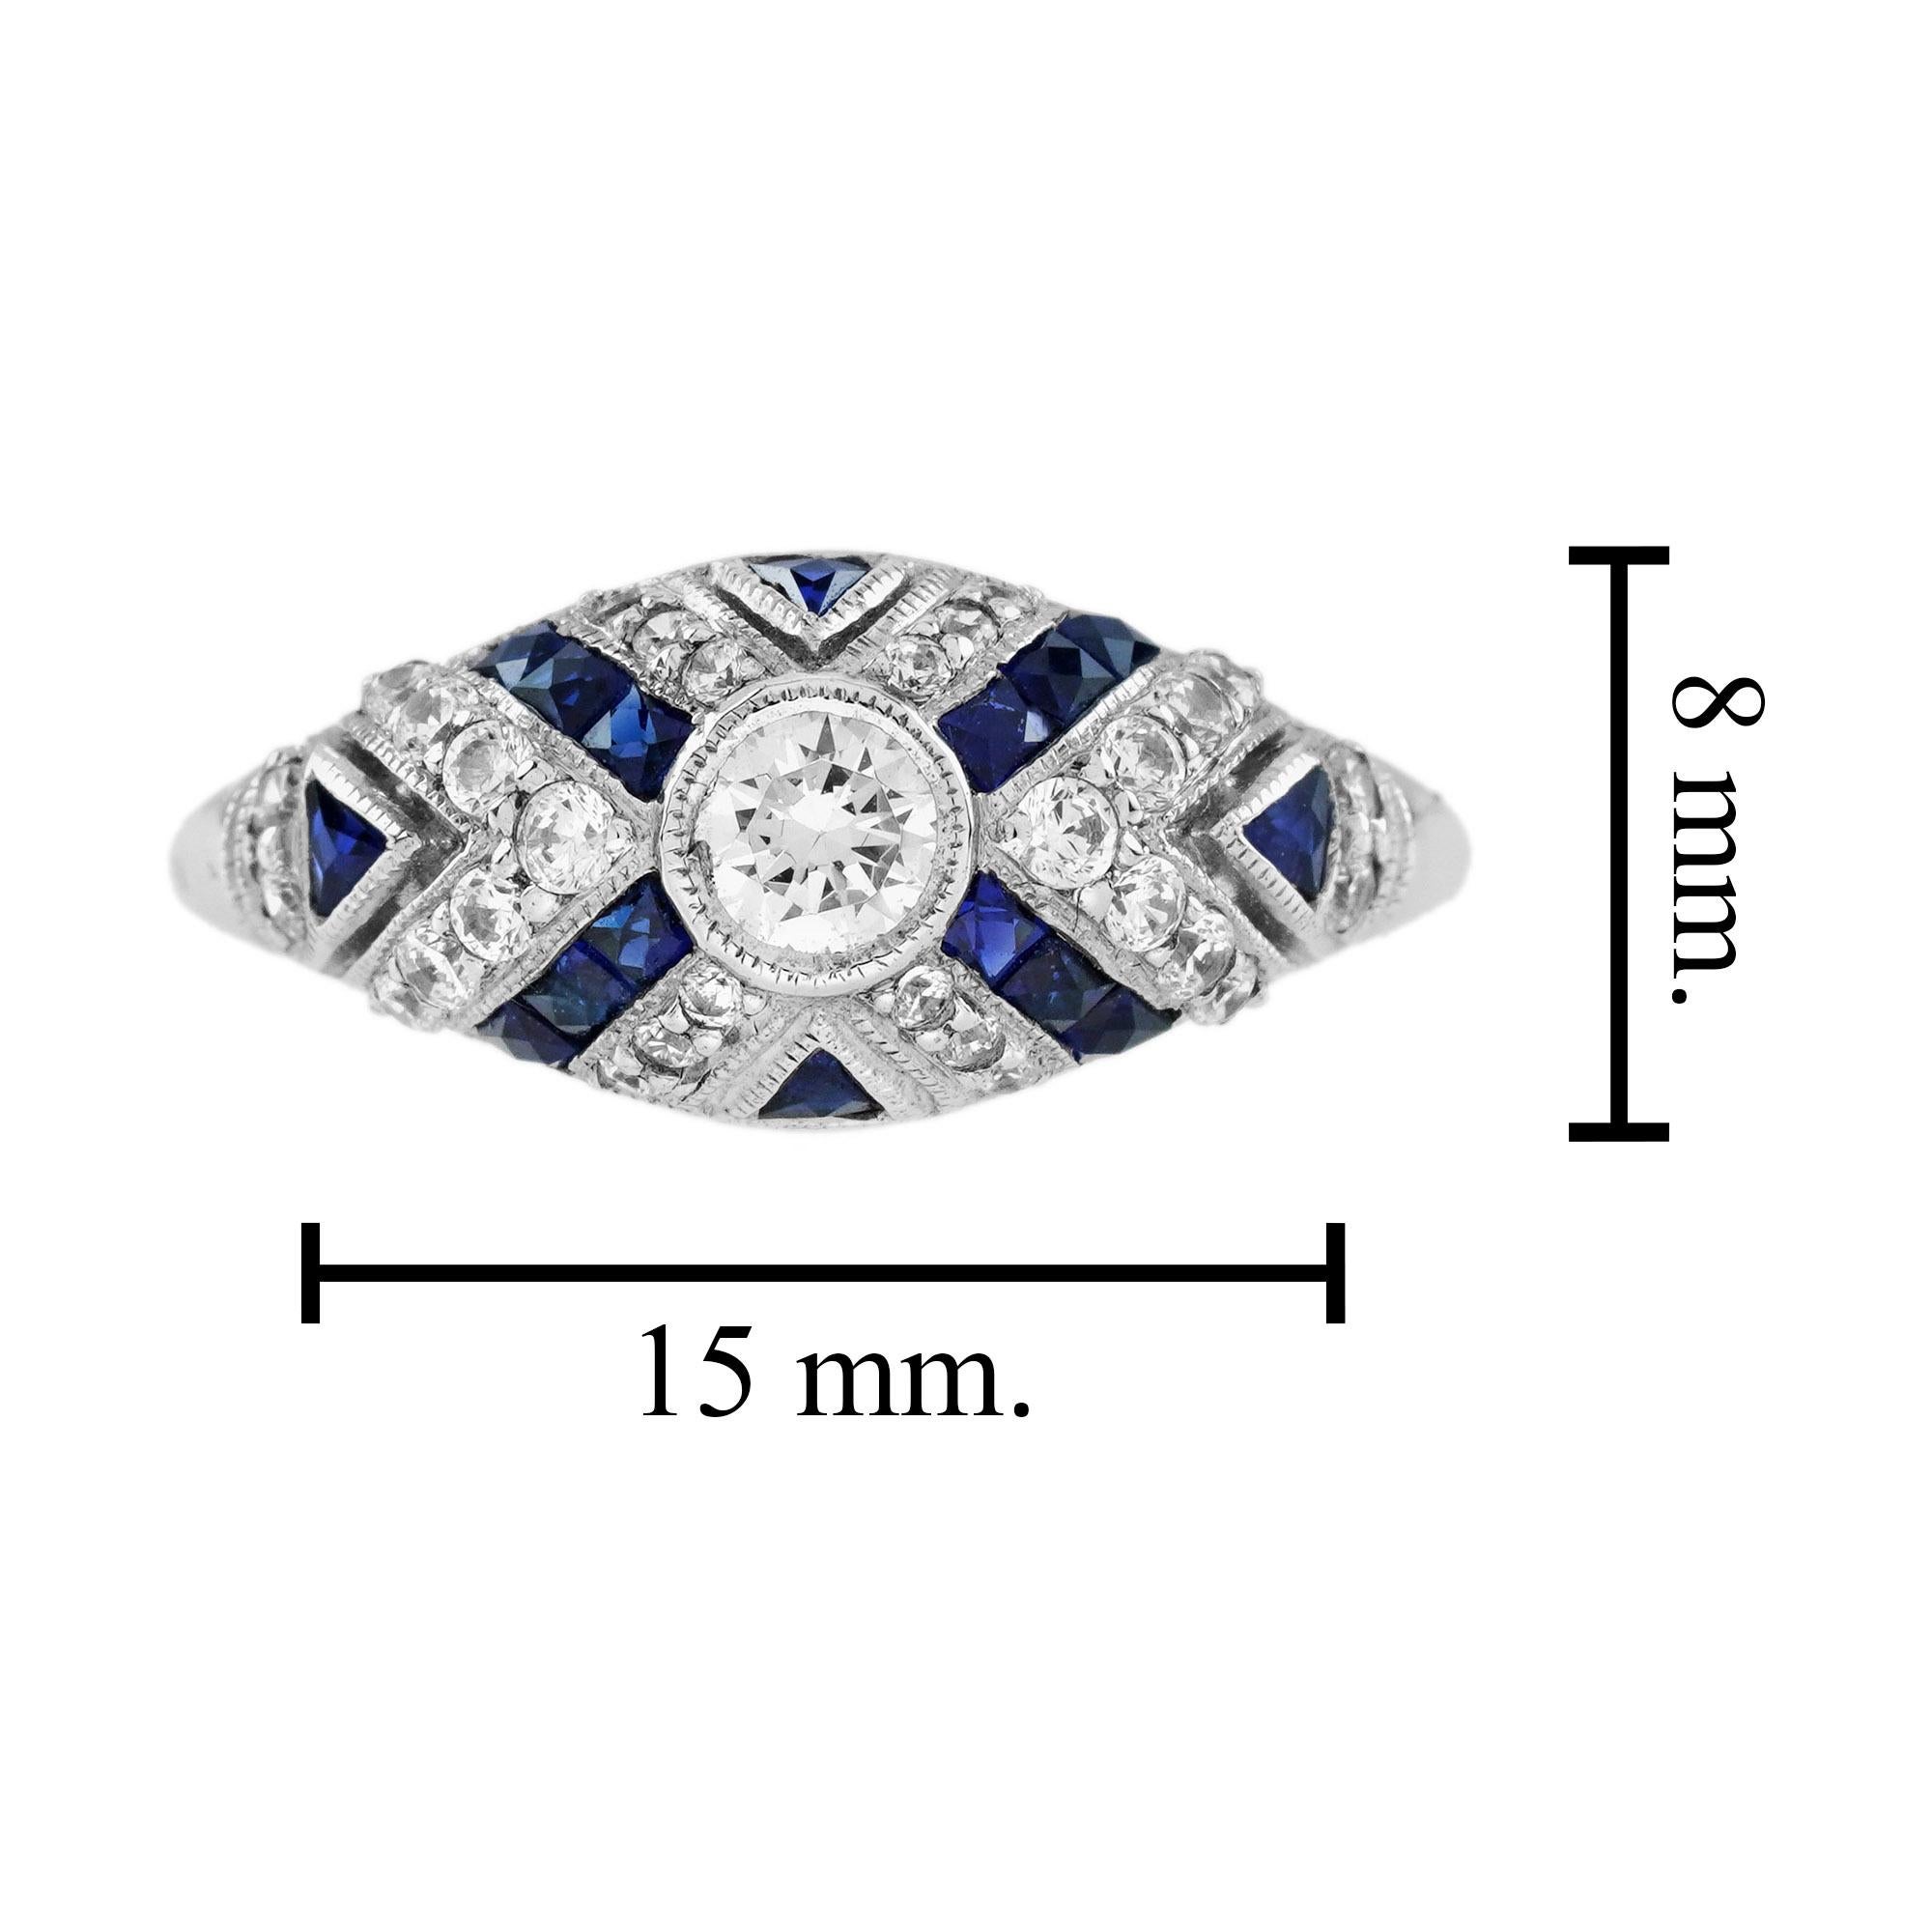 Diamond and Blue Sapphire Art Deco Style Engagement Ring in 18K White Gold For Sale 2